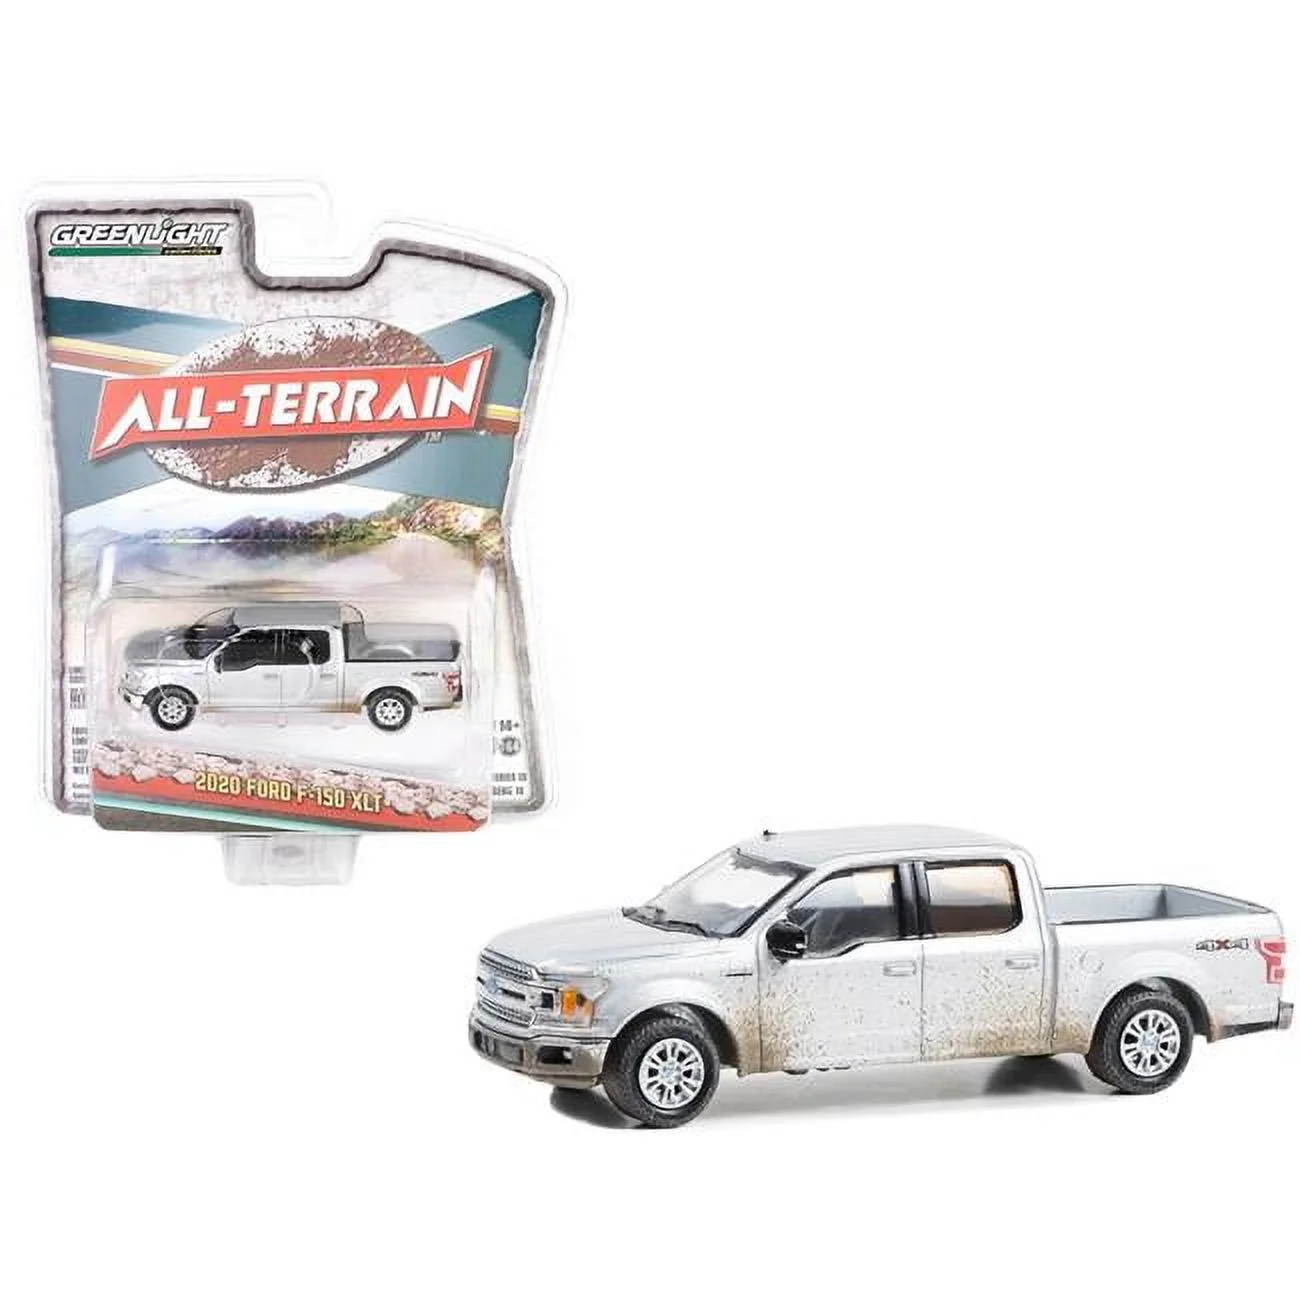 Greenlight 1/64 All-Terrain Series 15- 2020 Ford F-150 SuperCrew - Iconic Silver with Mud Spray 35270-F - Thumbnail